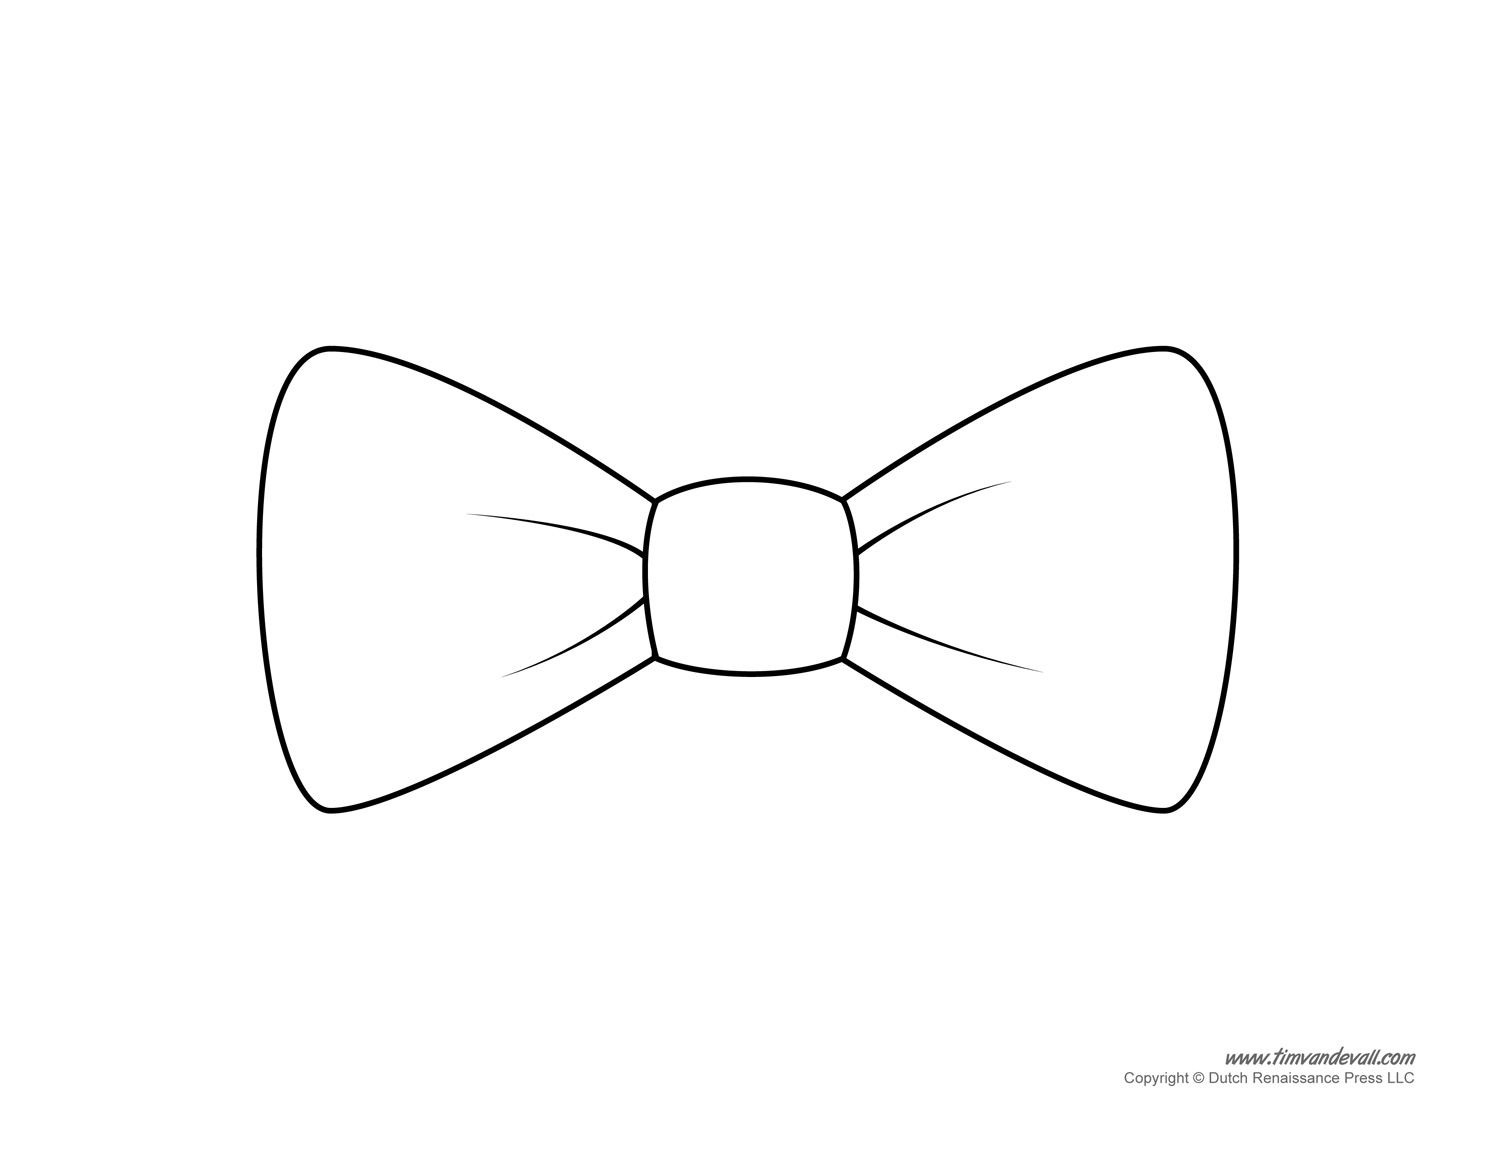 Free Bow Outline Cliparts, Download Free Clip Art, Free Clip.